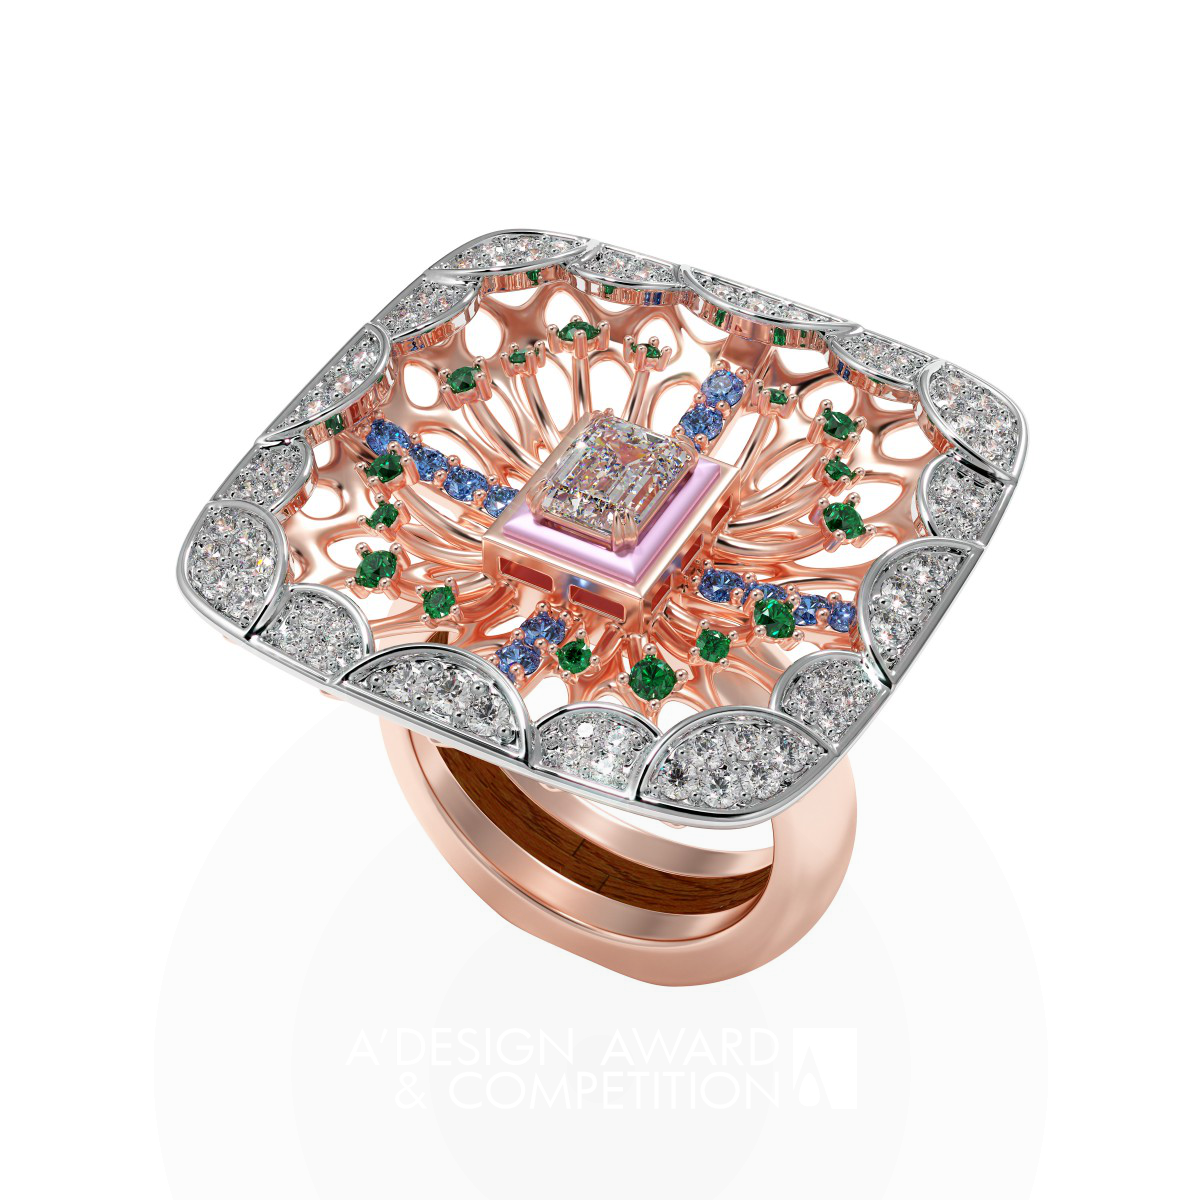 Mohamd Sadeq habibzadeh Harris wins Iron at the prestigious A' Jewelry Design Award with Hope Garden Ring.